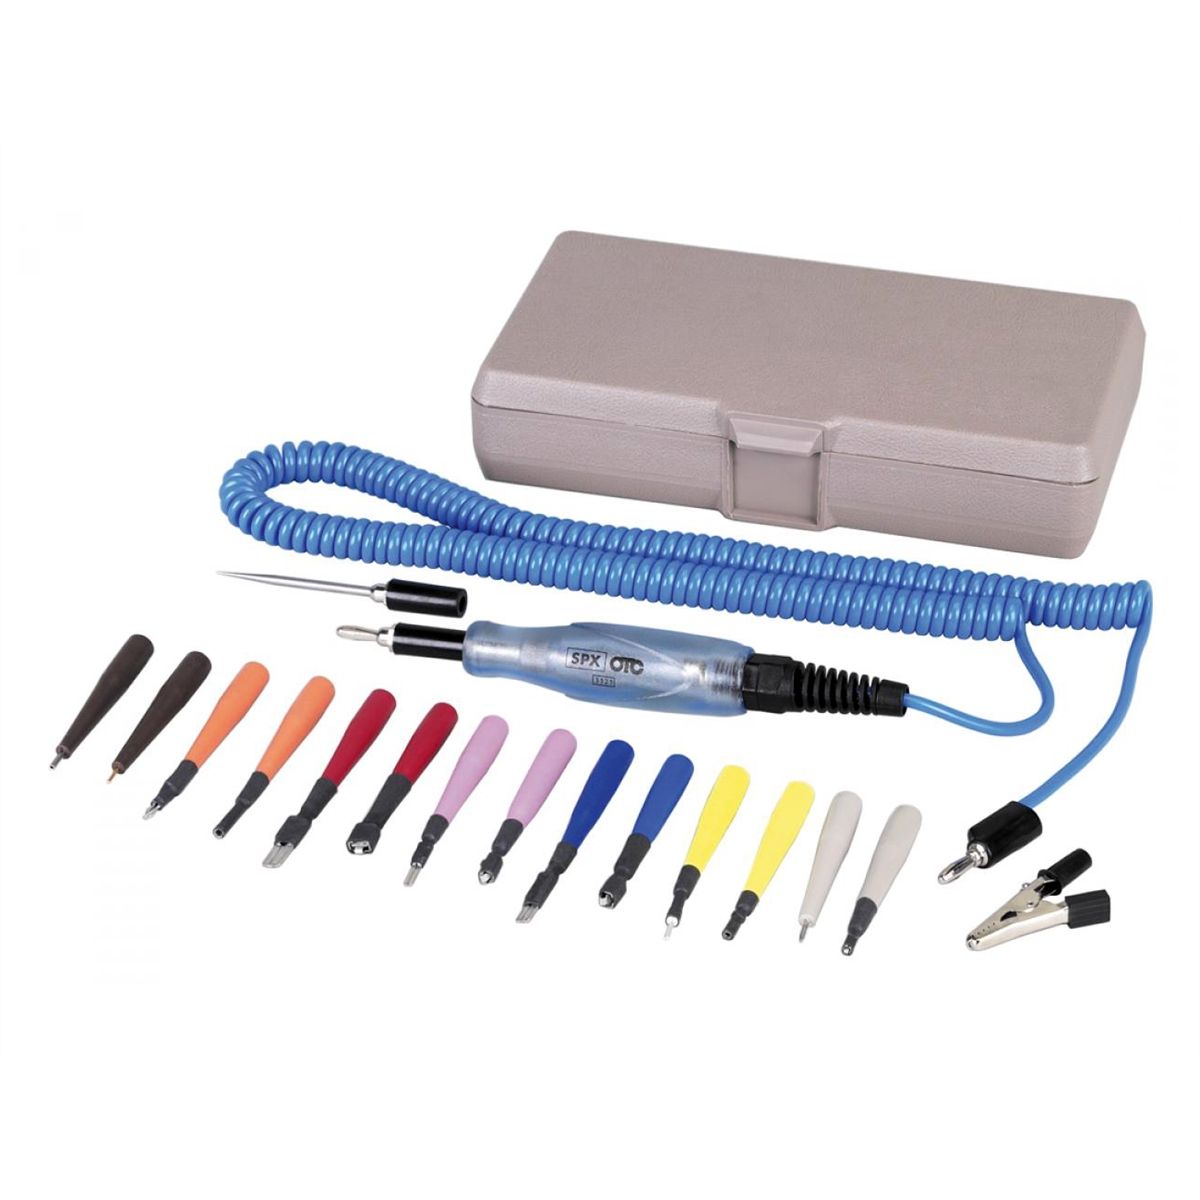 HT-2126 - 7pc Deutsch Terminal Release/Removal Tool Kit - 4, 8, 12, 14 –  Jackco Transnational Inc.